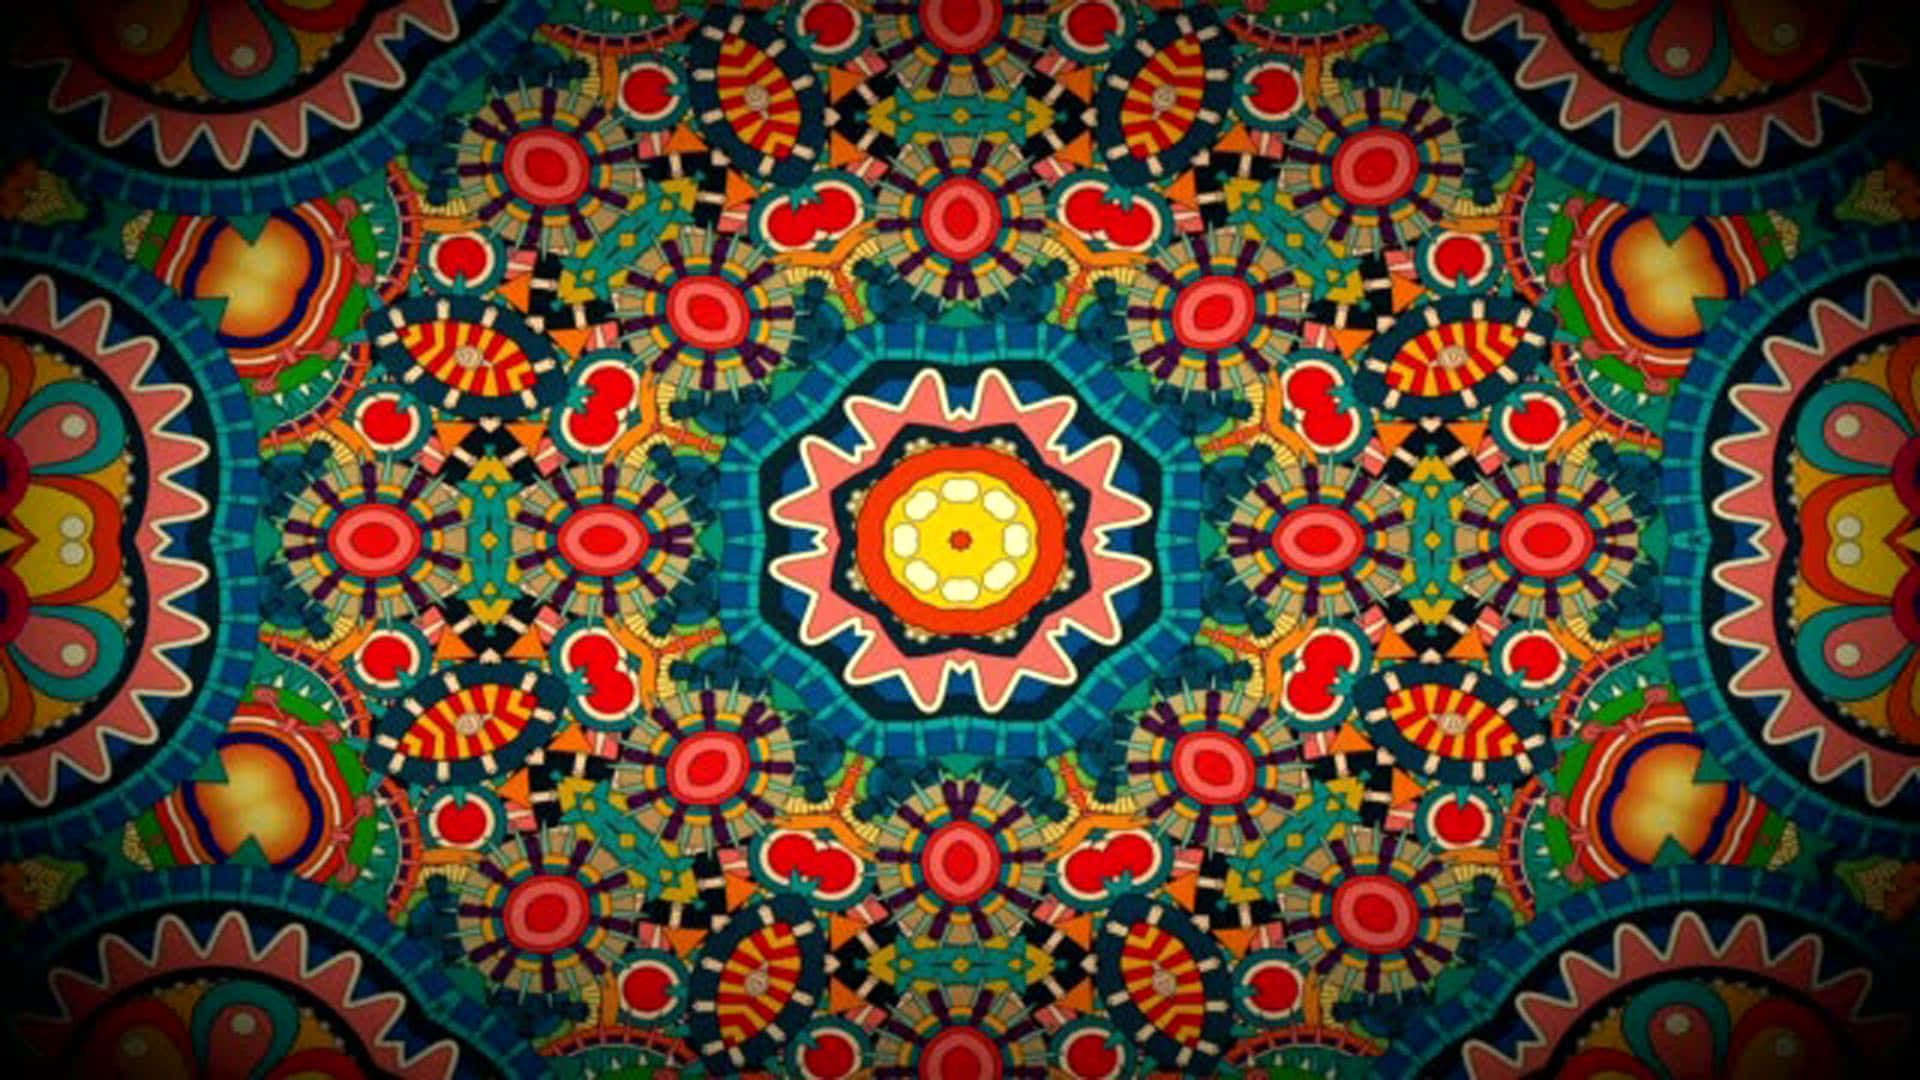 A Colorful And Colorful Pattern With A Circular Design Wallpaper